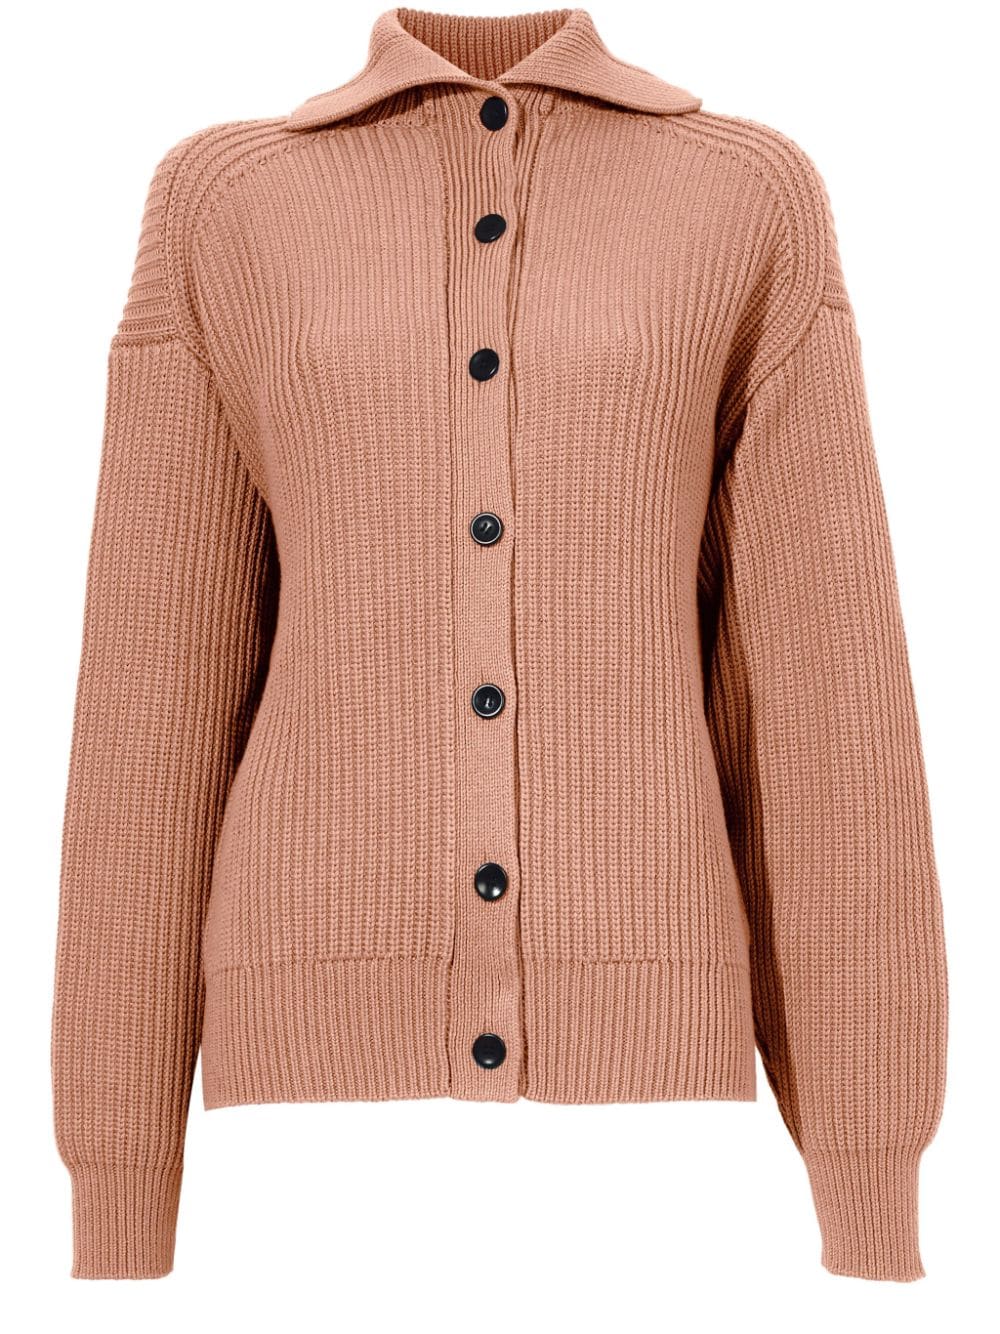 Proenza Schouler White Label ribbed-knit reversible cardigan - Pink von Proenza Schouler White Label